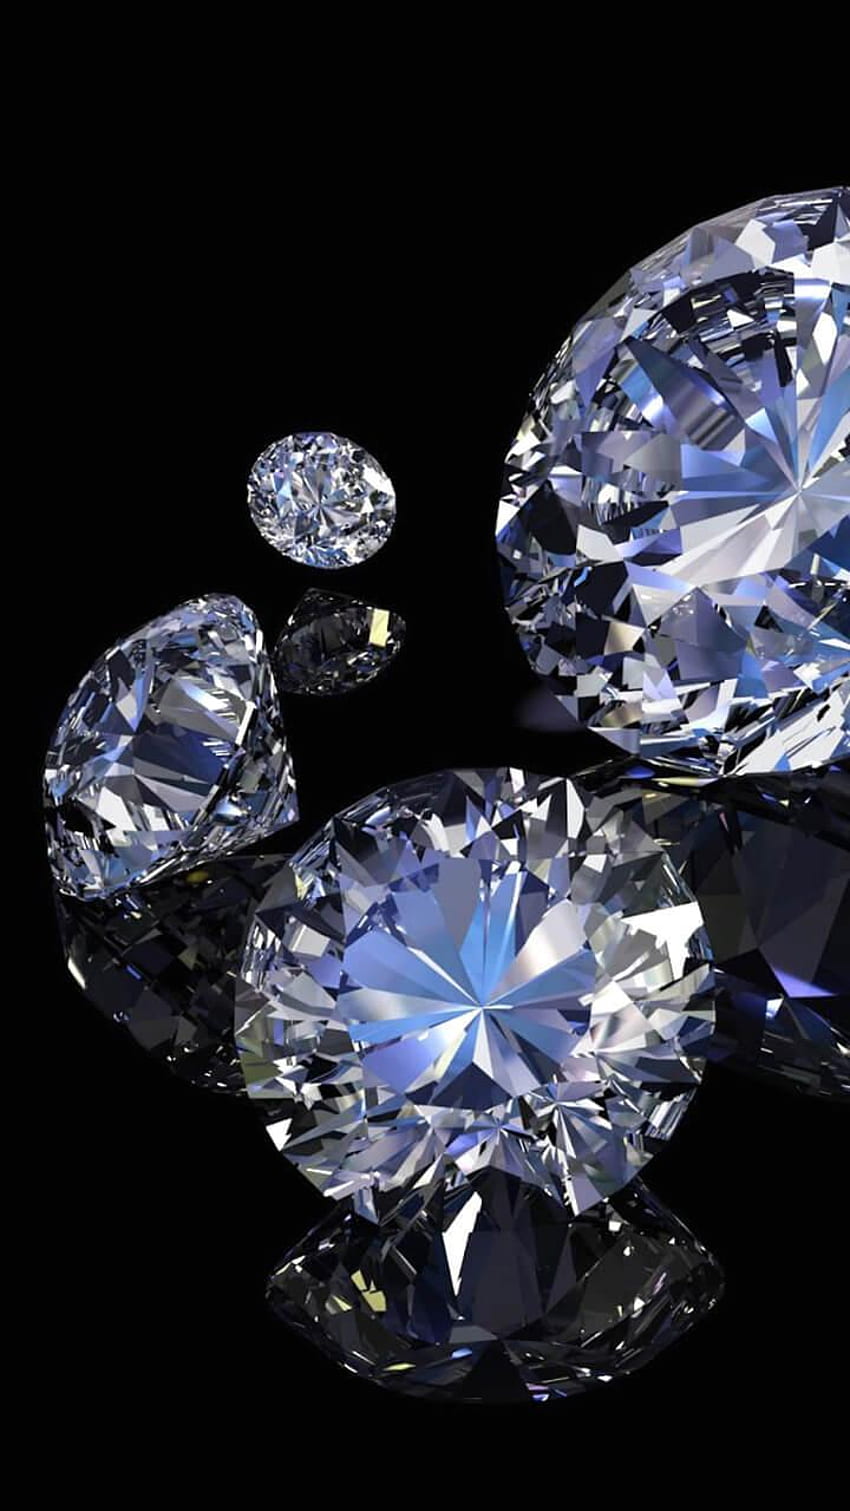 Diamond for Android, Dimond HD phone wallpaper